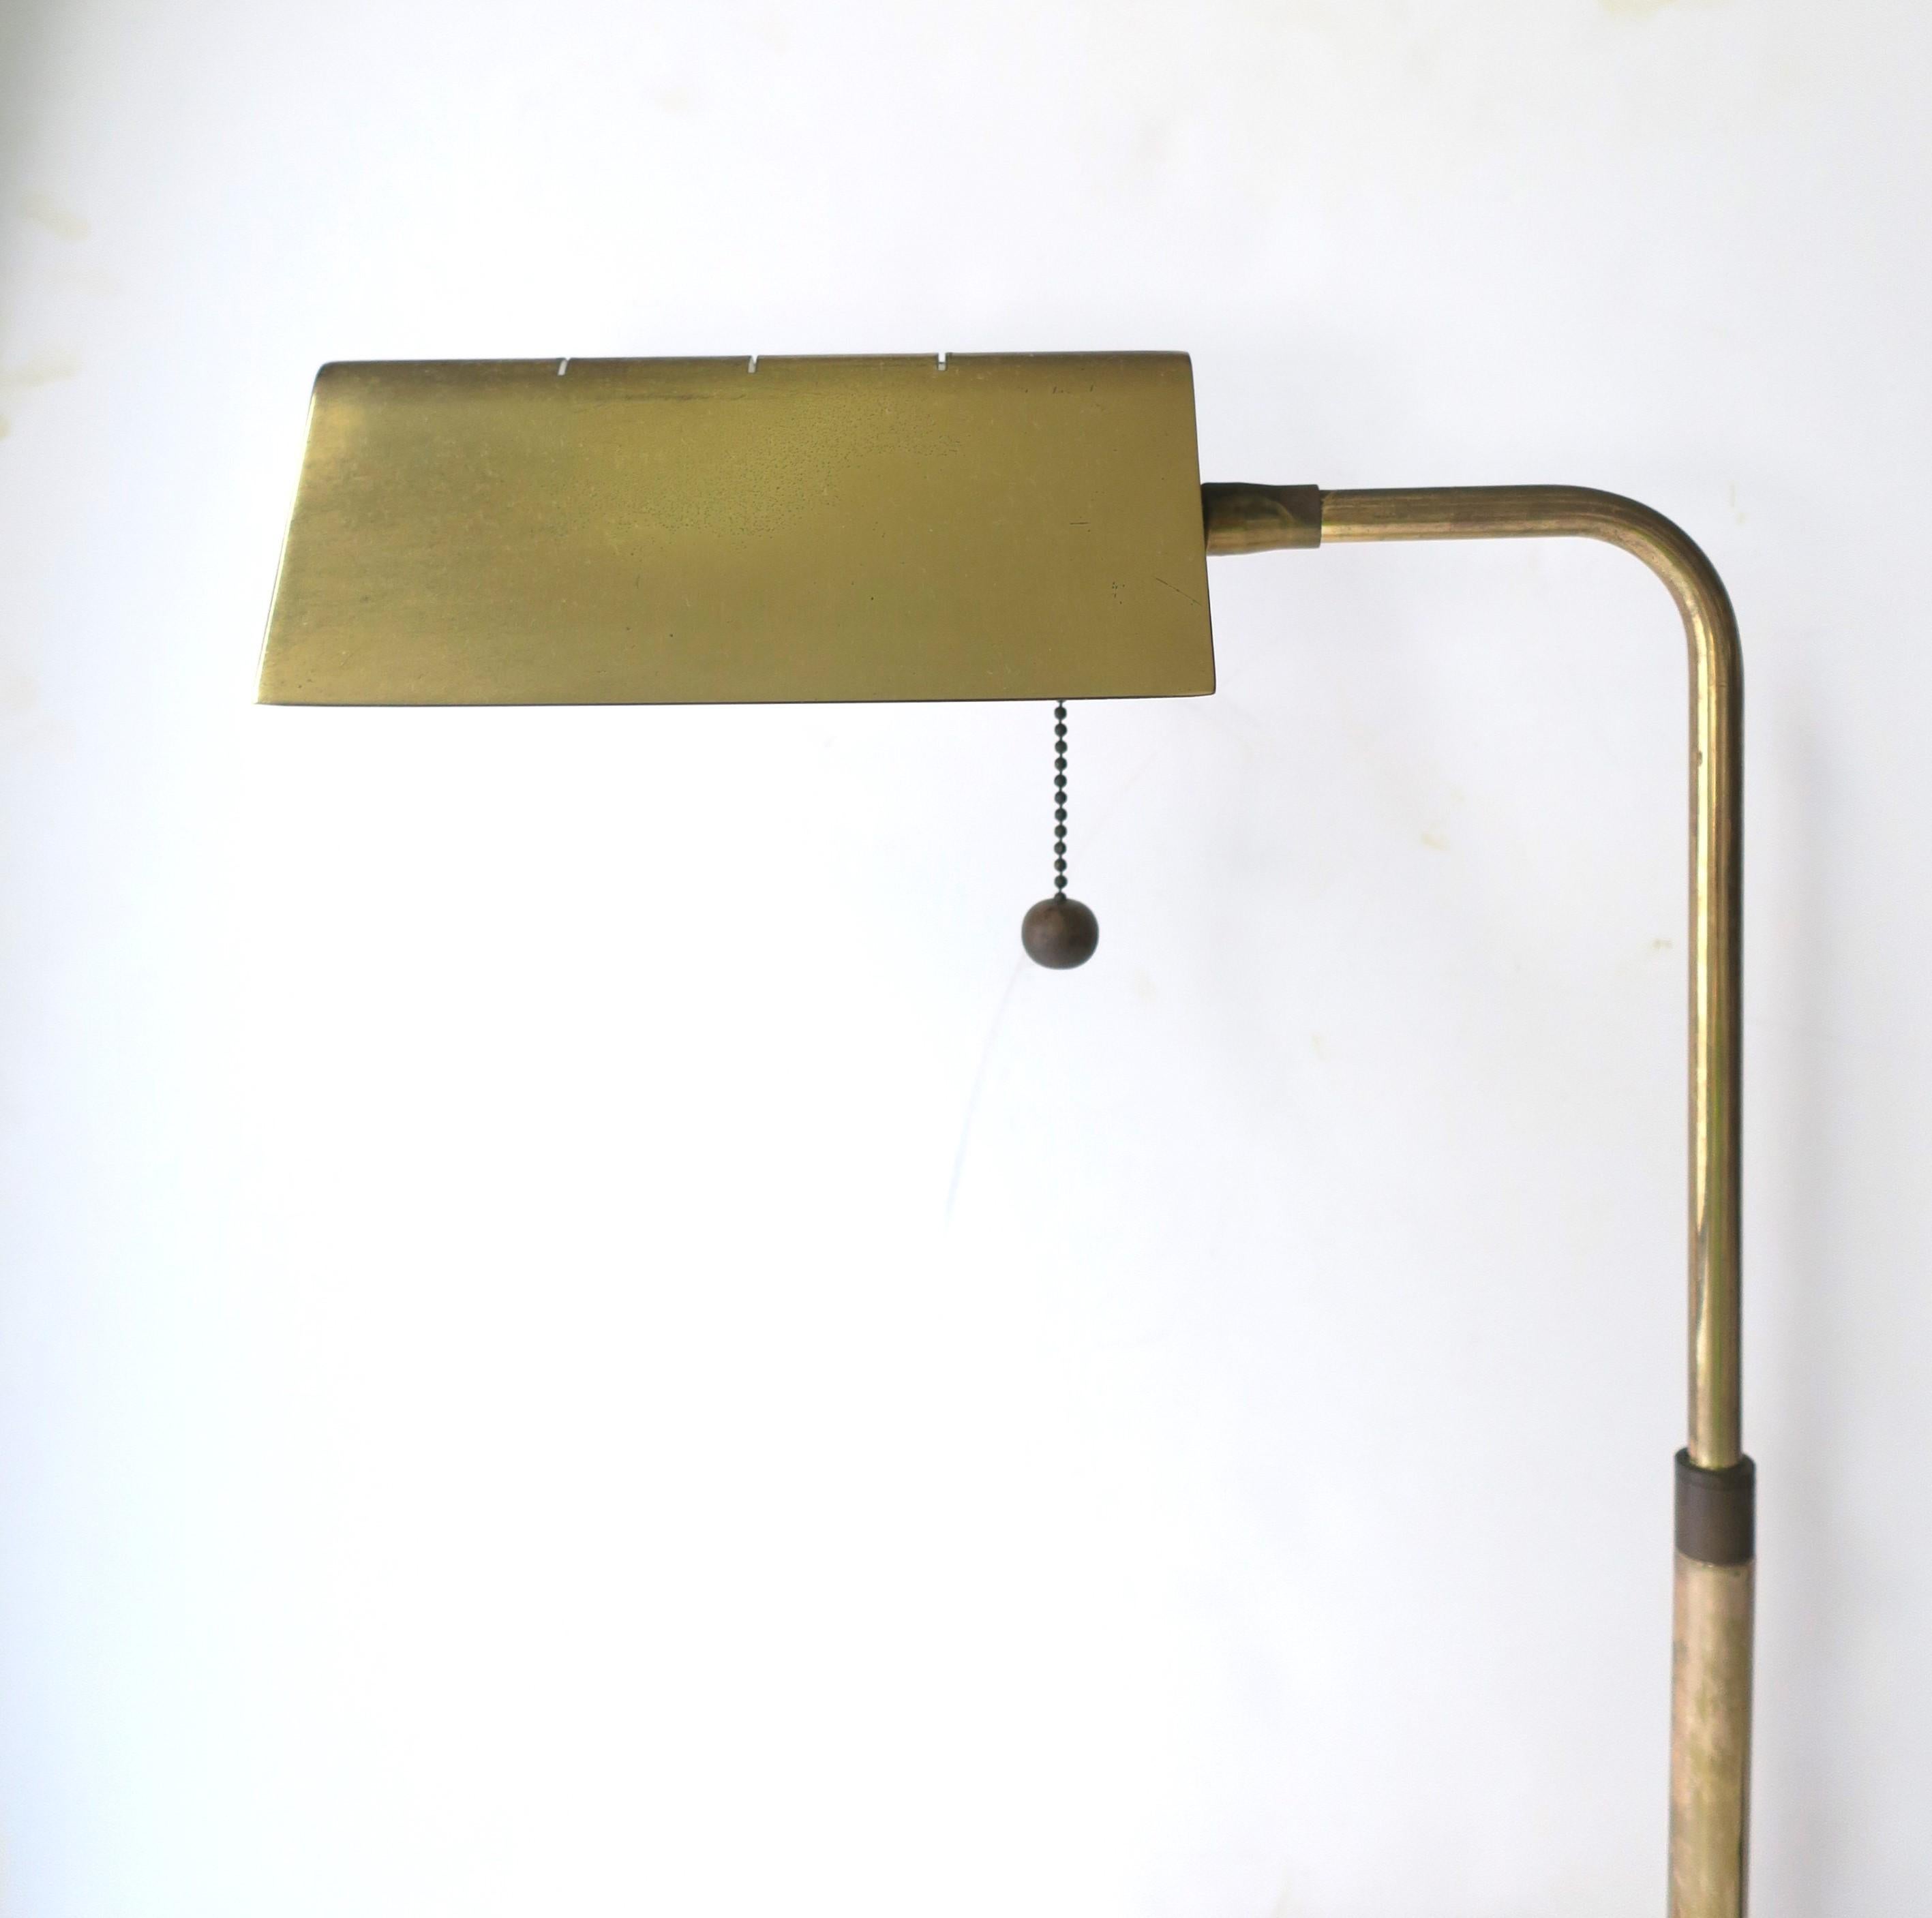 Italian Brass and Travertine Marble Desk or Table Lamp, circa 1960s 1970s For Sale 5